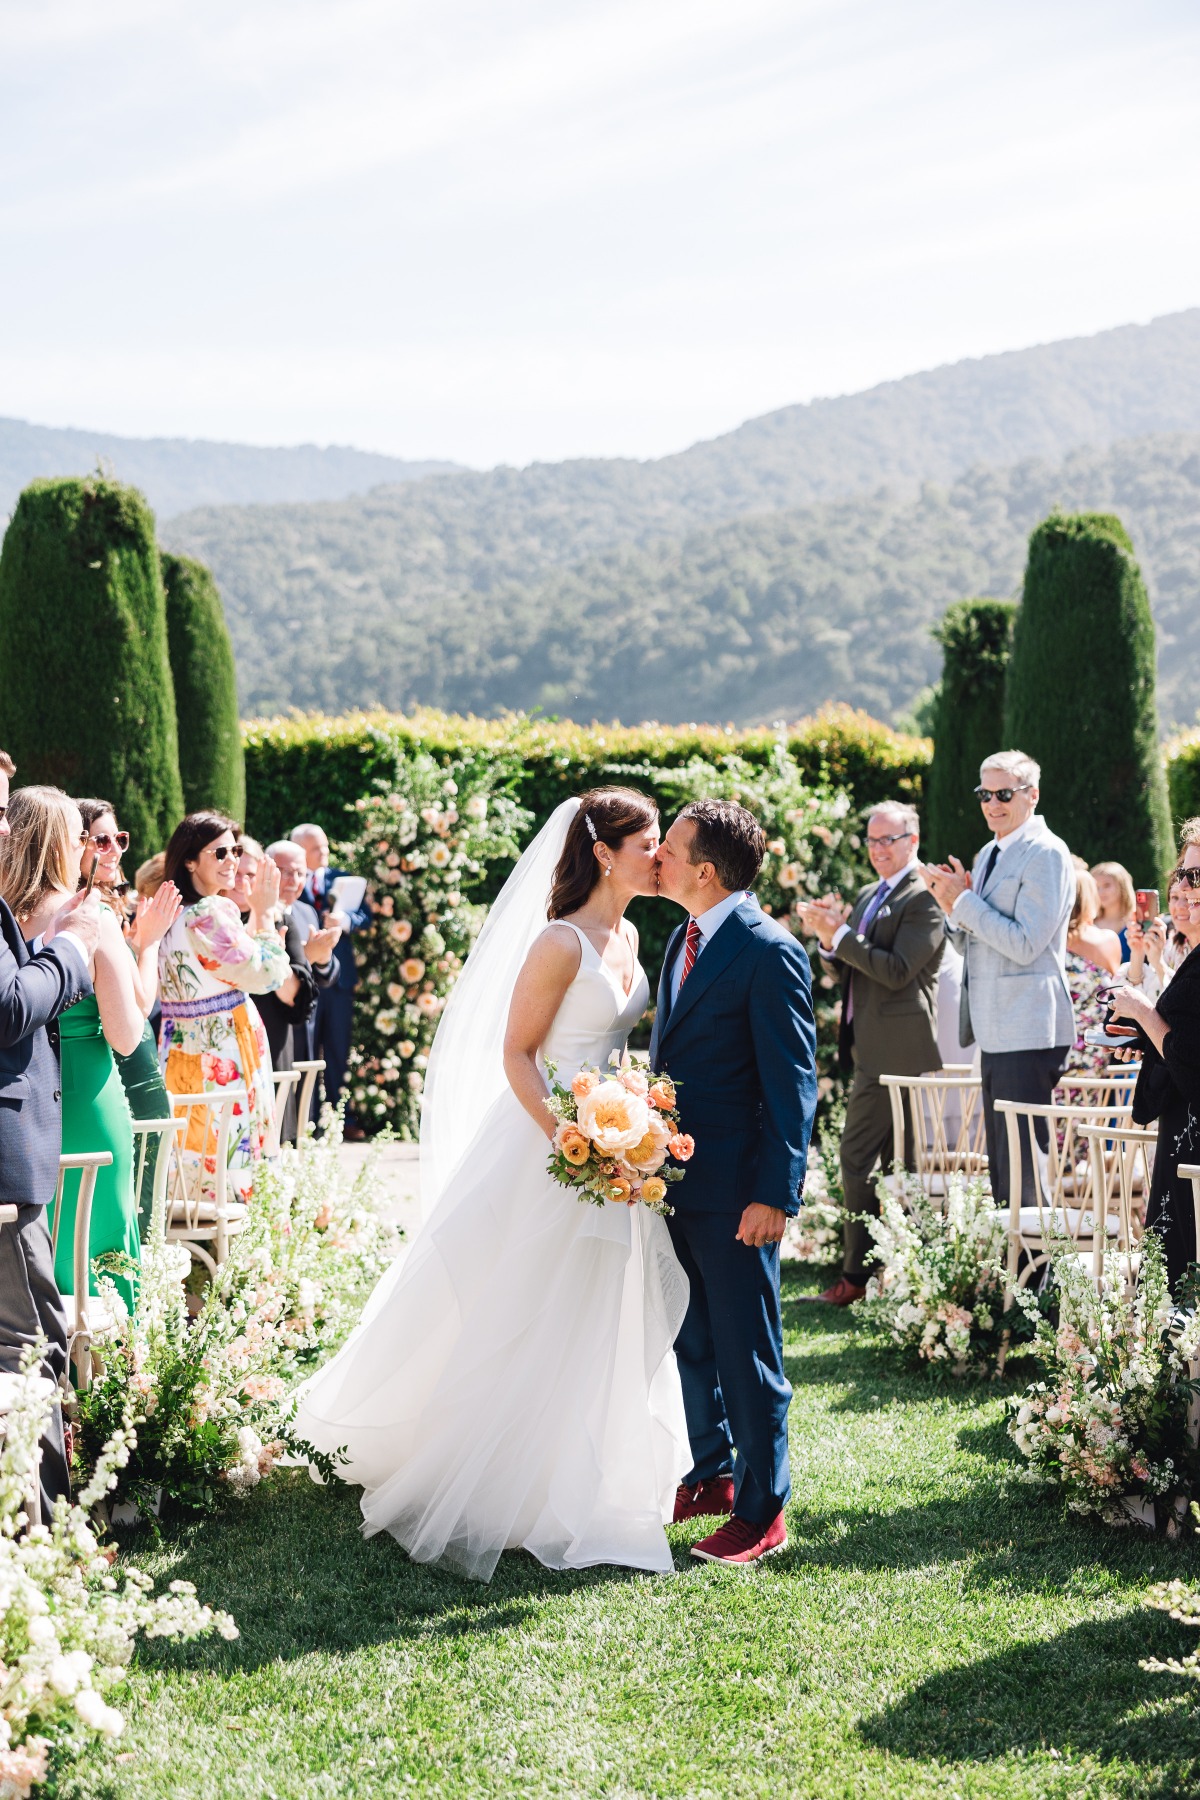 Second first kiss at Carmel Valley wedding ceremony 